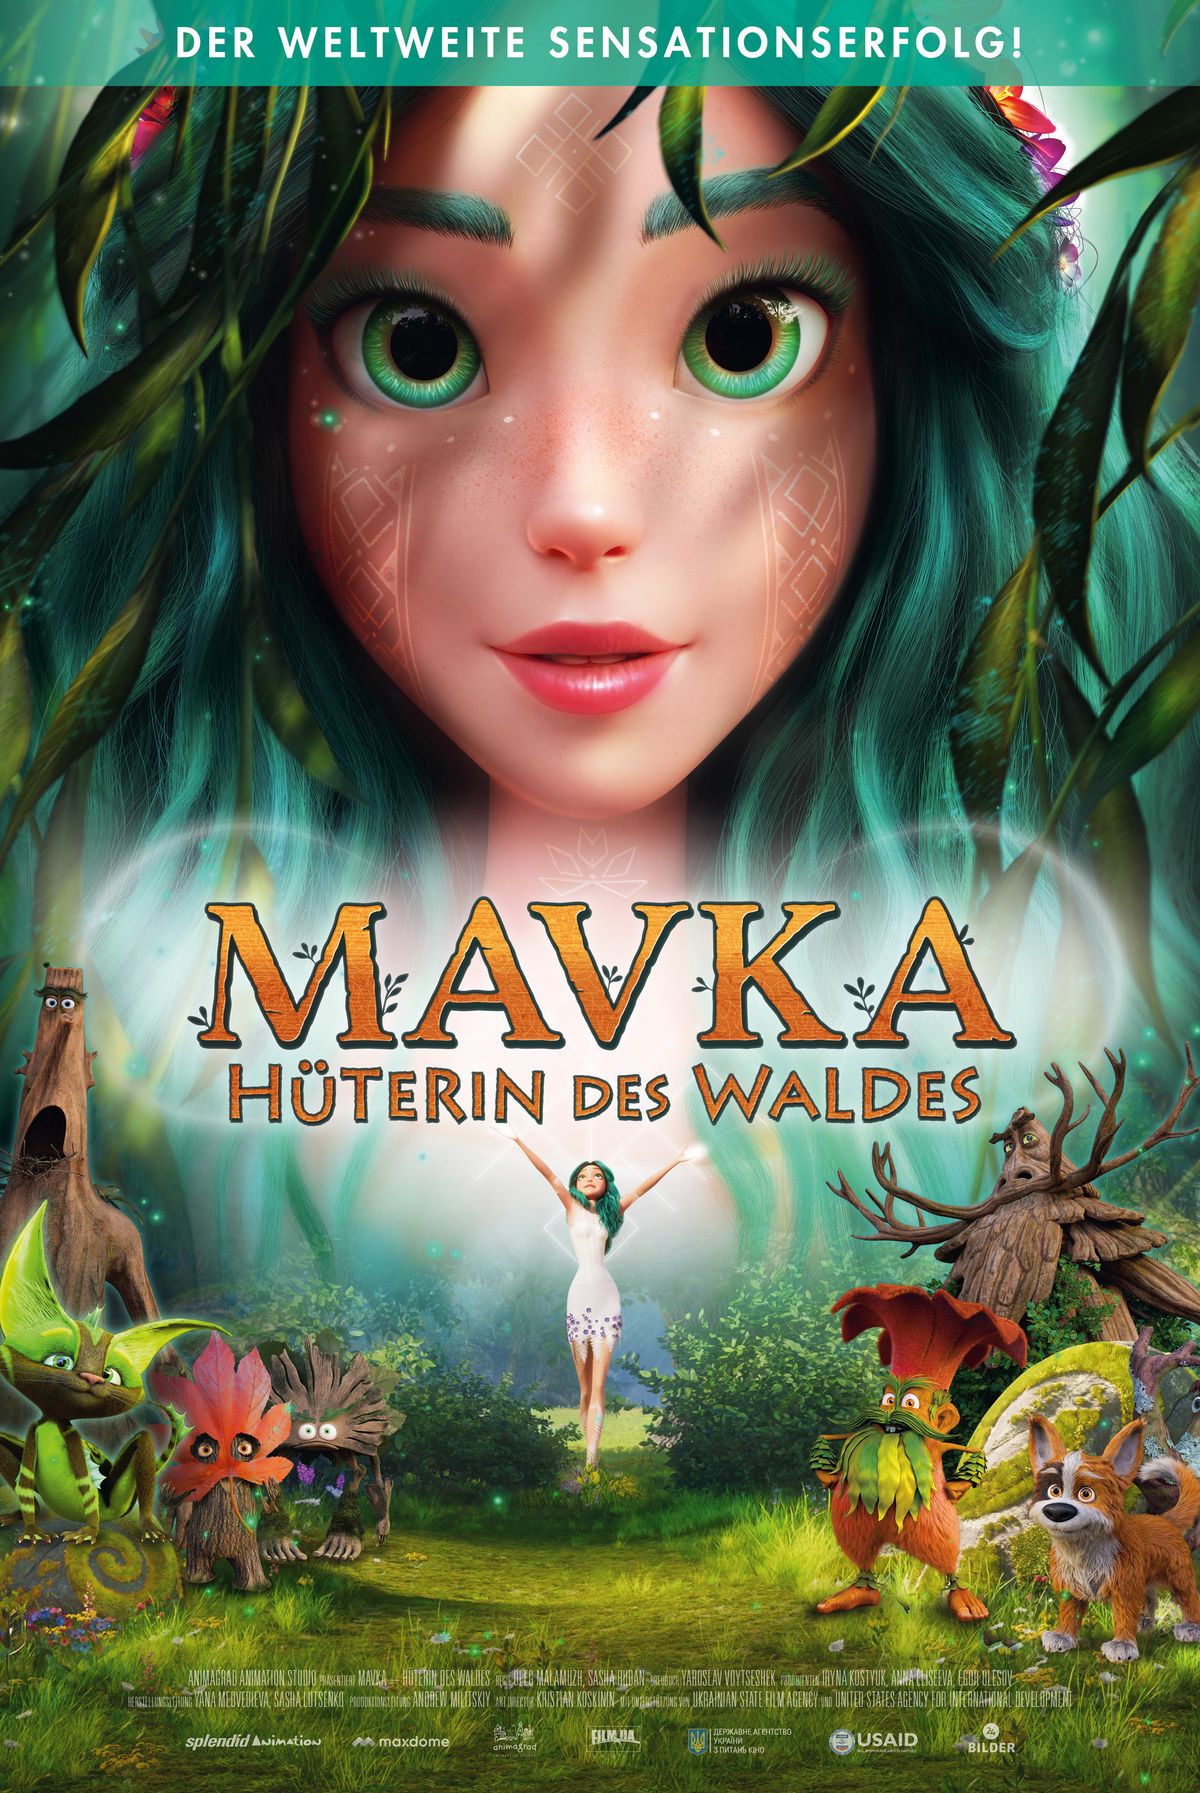 Mavka: The Forest Song (DVD)